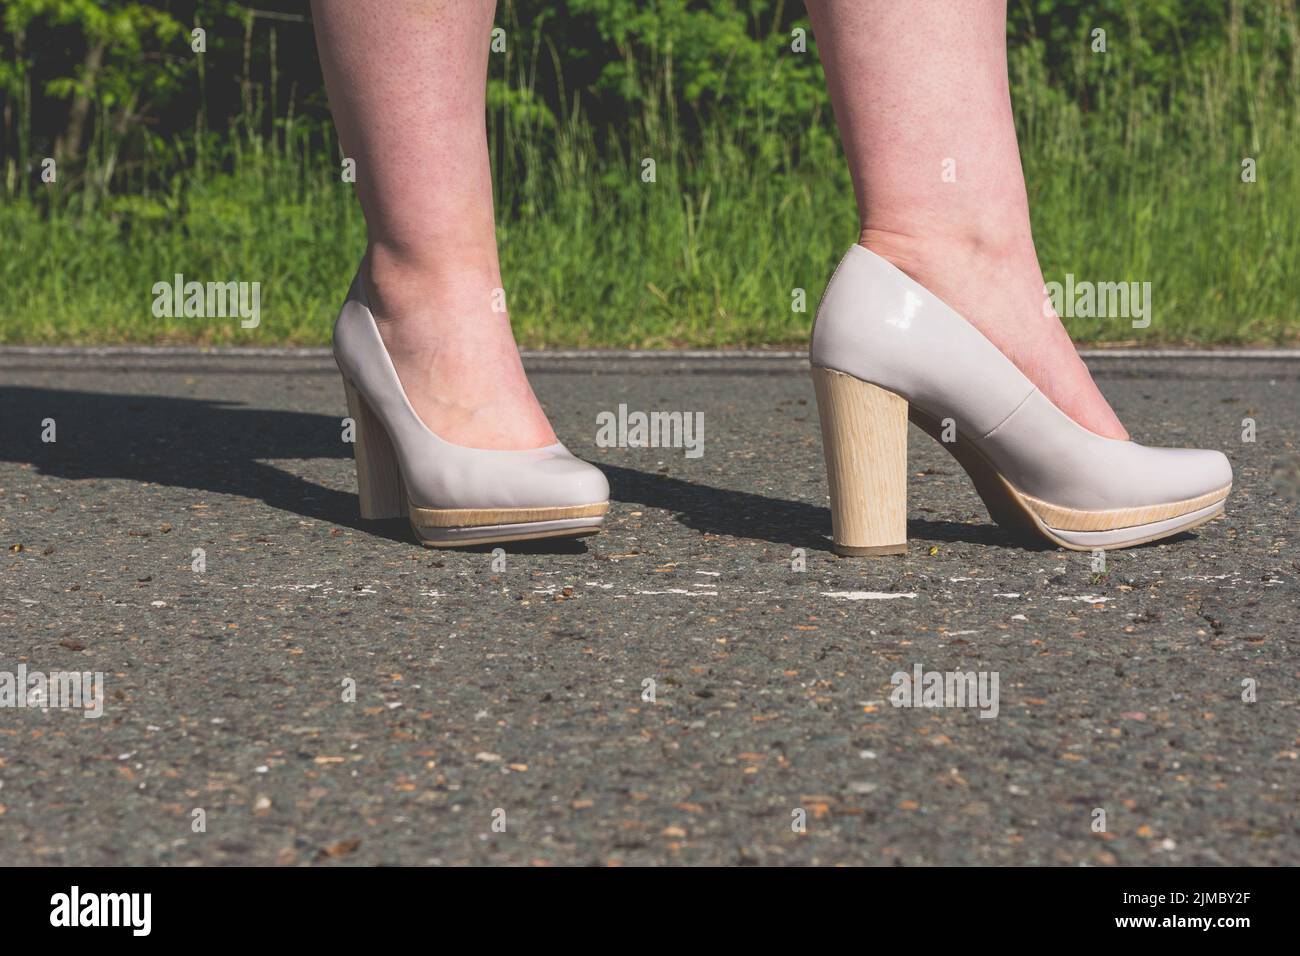 Legs of a woman wearing stylish high heeled shoes Stock Photo